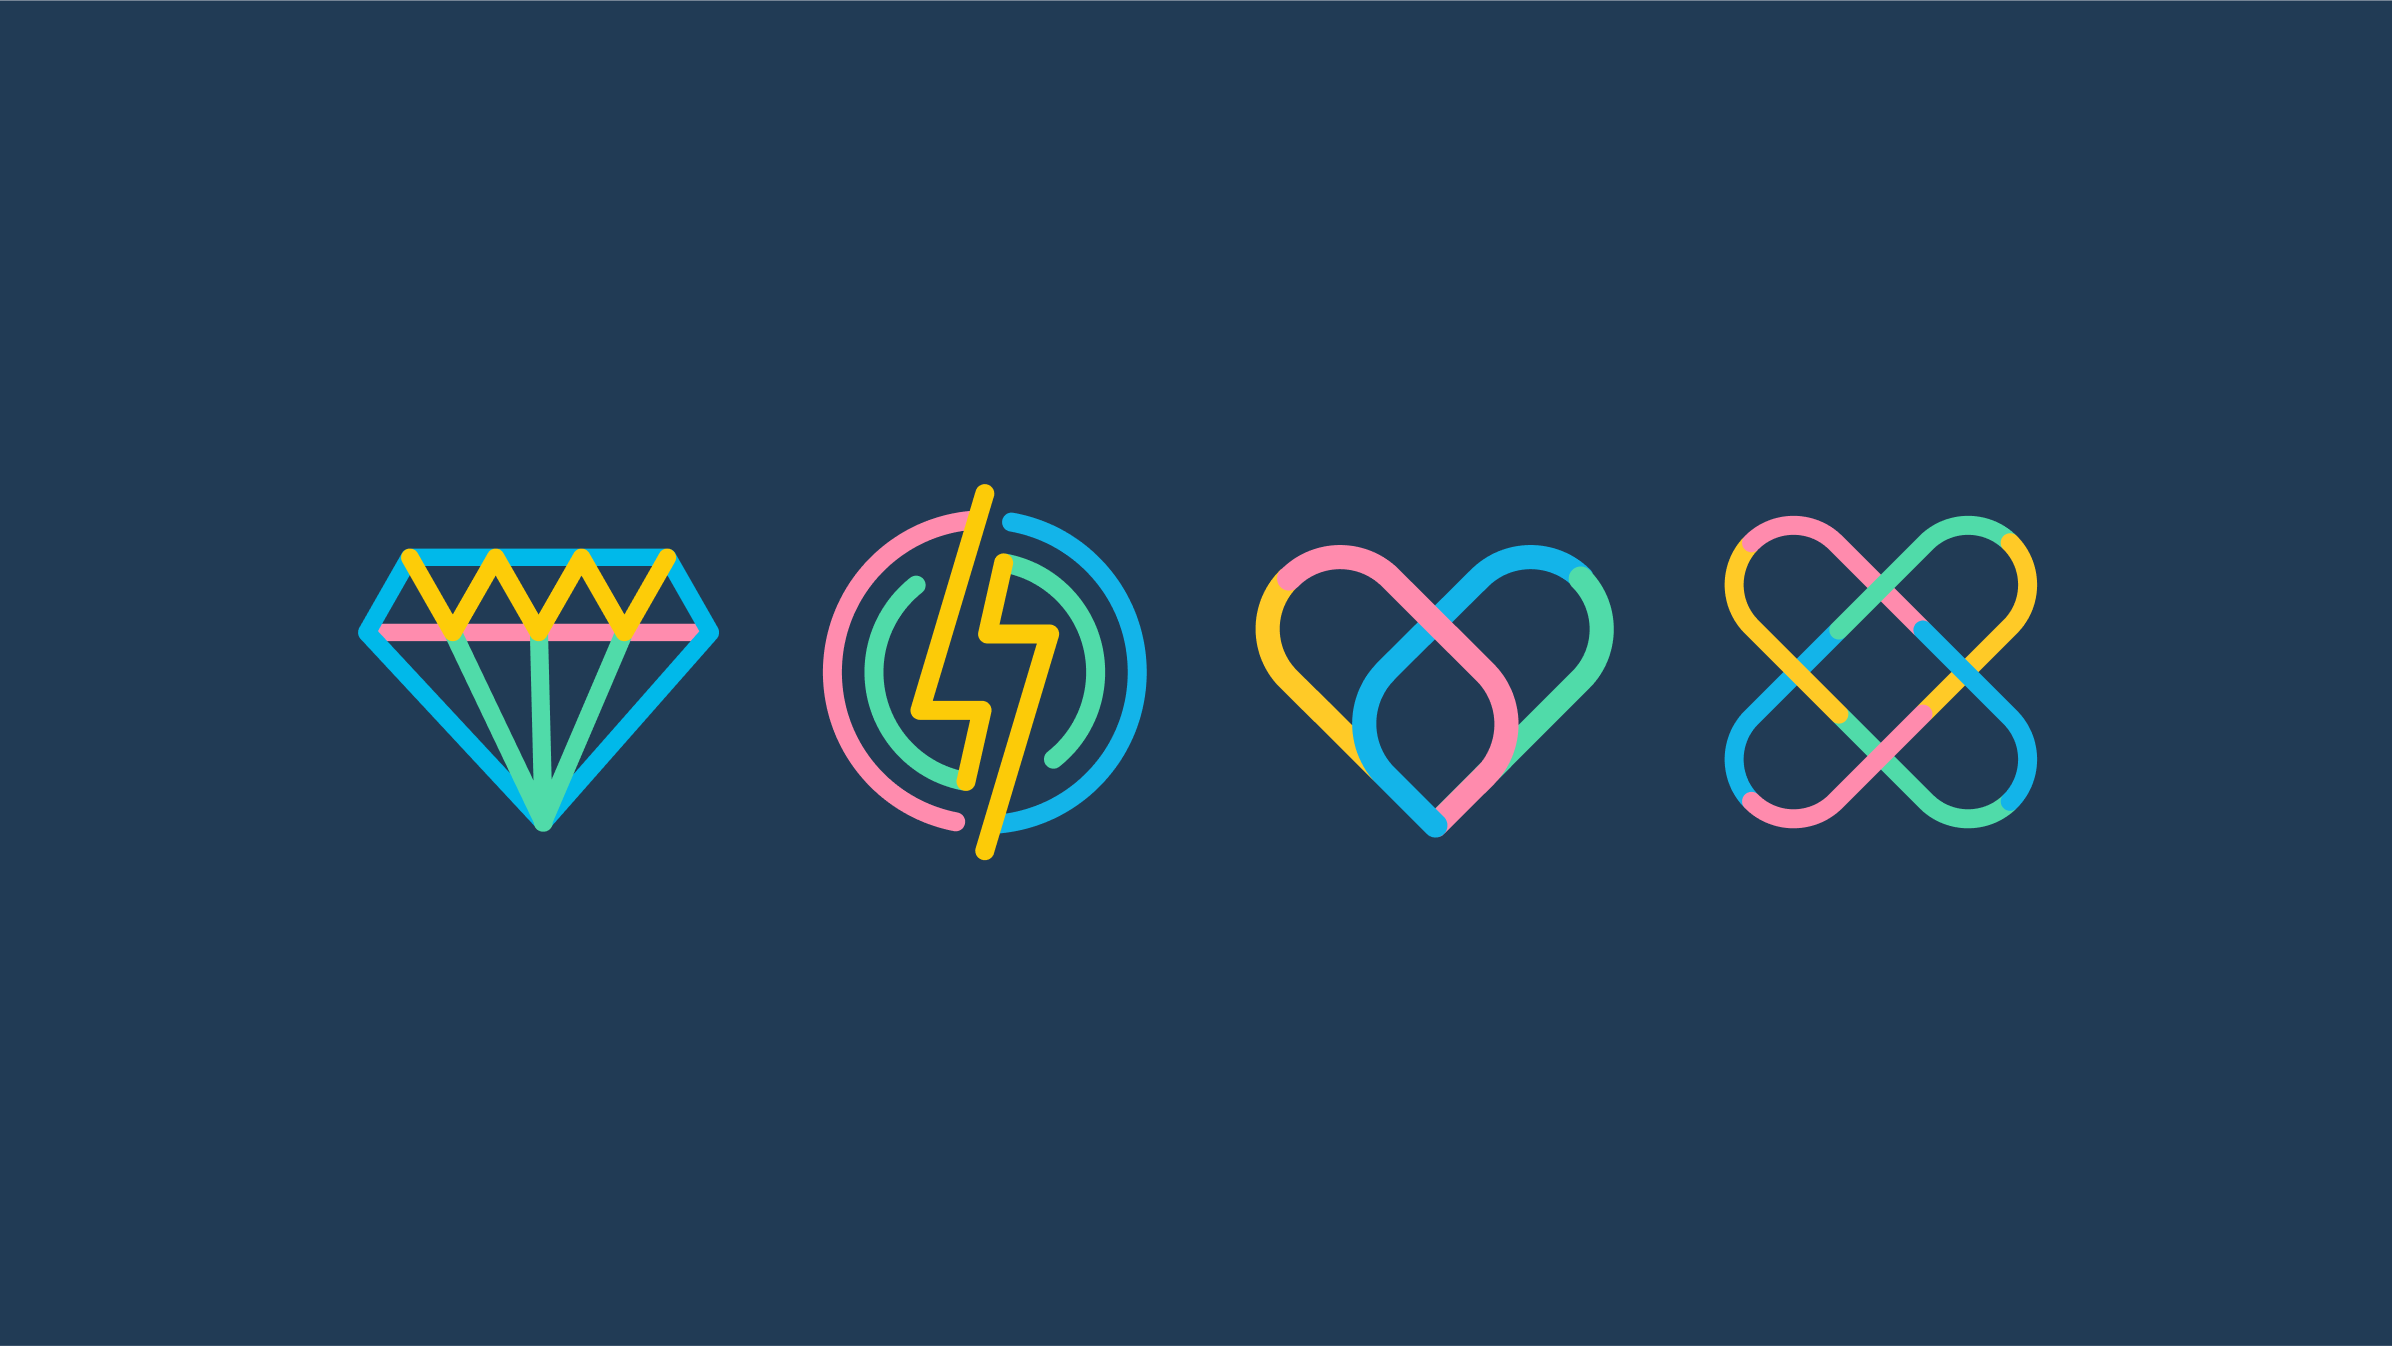 Icons for the four Xero values: make it beautiful, make it happen, make it human, and make it together.